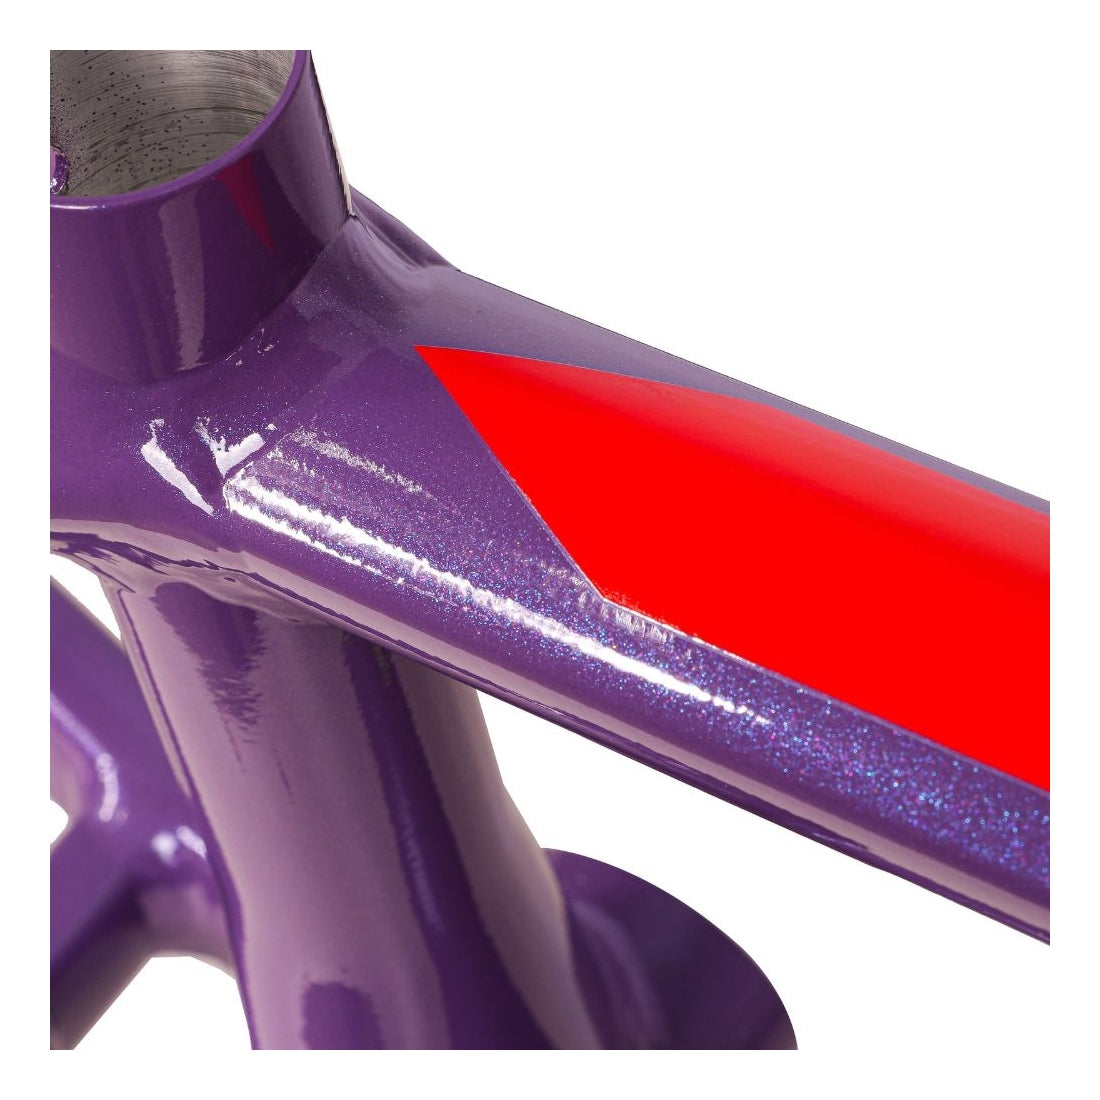 Close-up of an Inspyre Concorde V3 Pro XL Frame purple bicycle frame with a red decal.